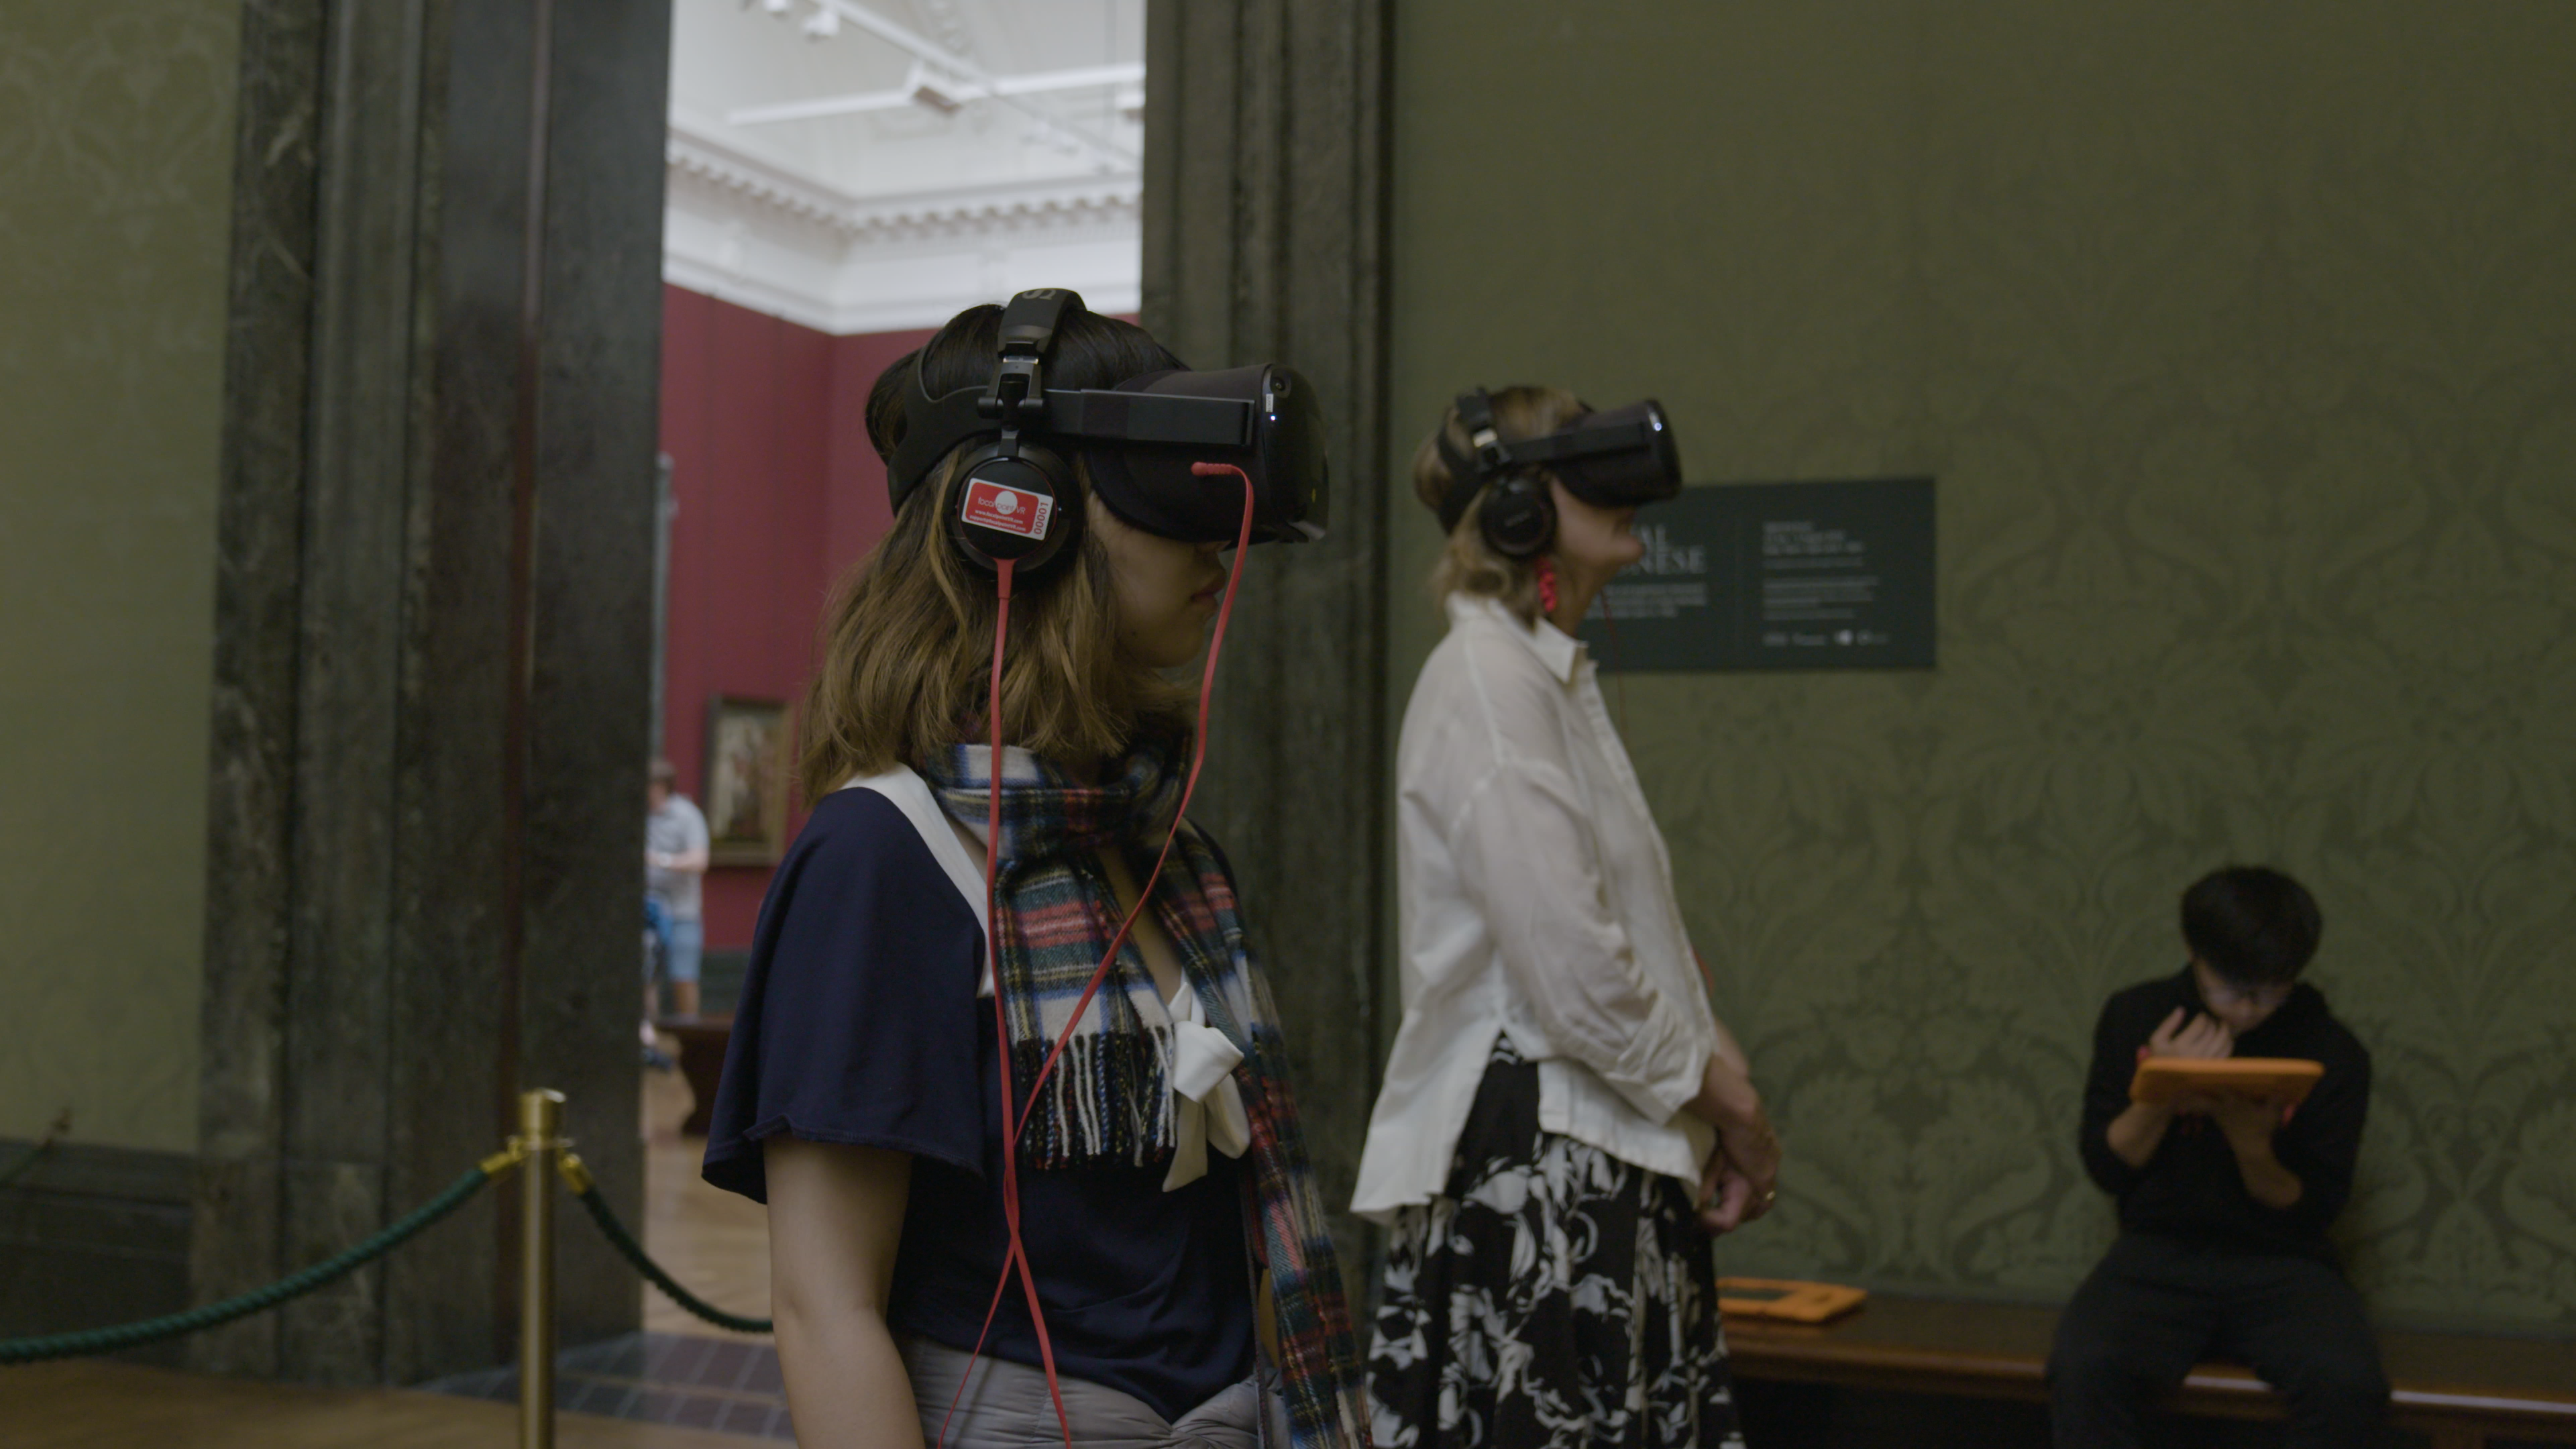 National Gallery visitors will wear headsets in the Virtual Veronese experience © The National Gallery, London